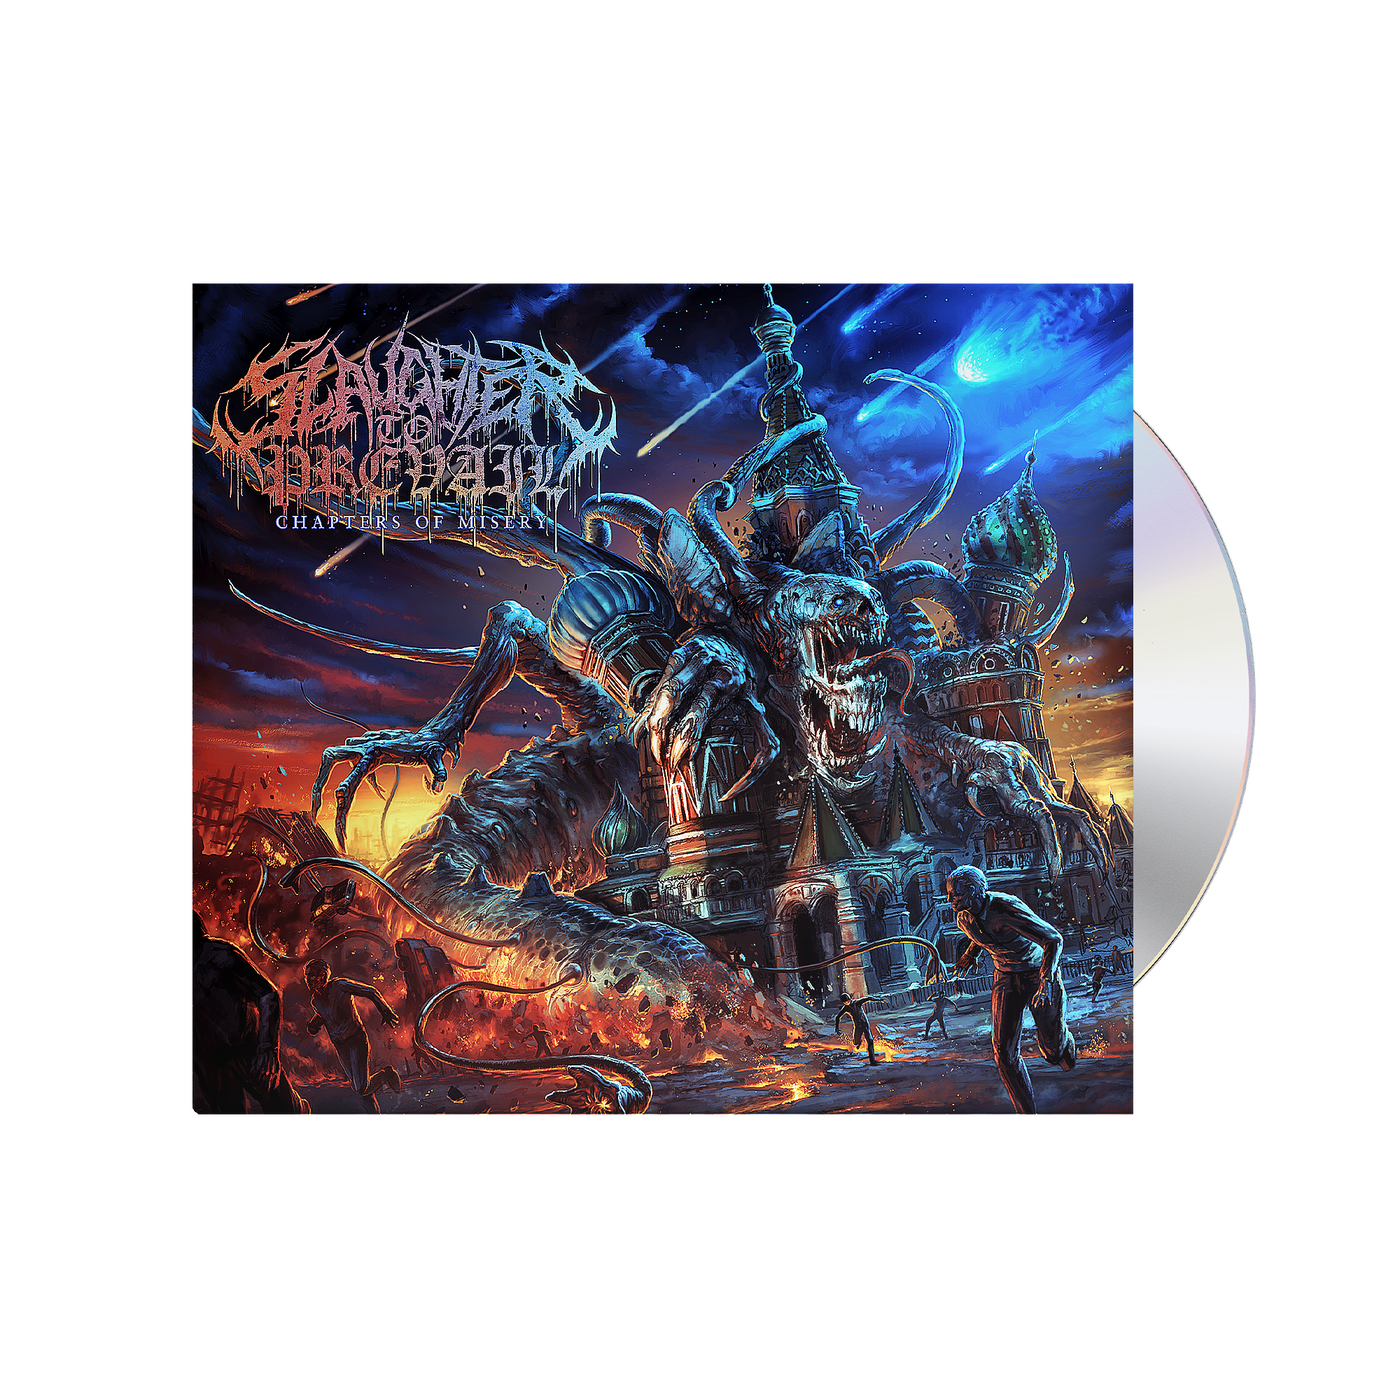 Slaughter To Prevail - 'Chapters Of Misery' EP CD Digipak